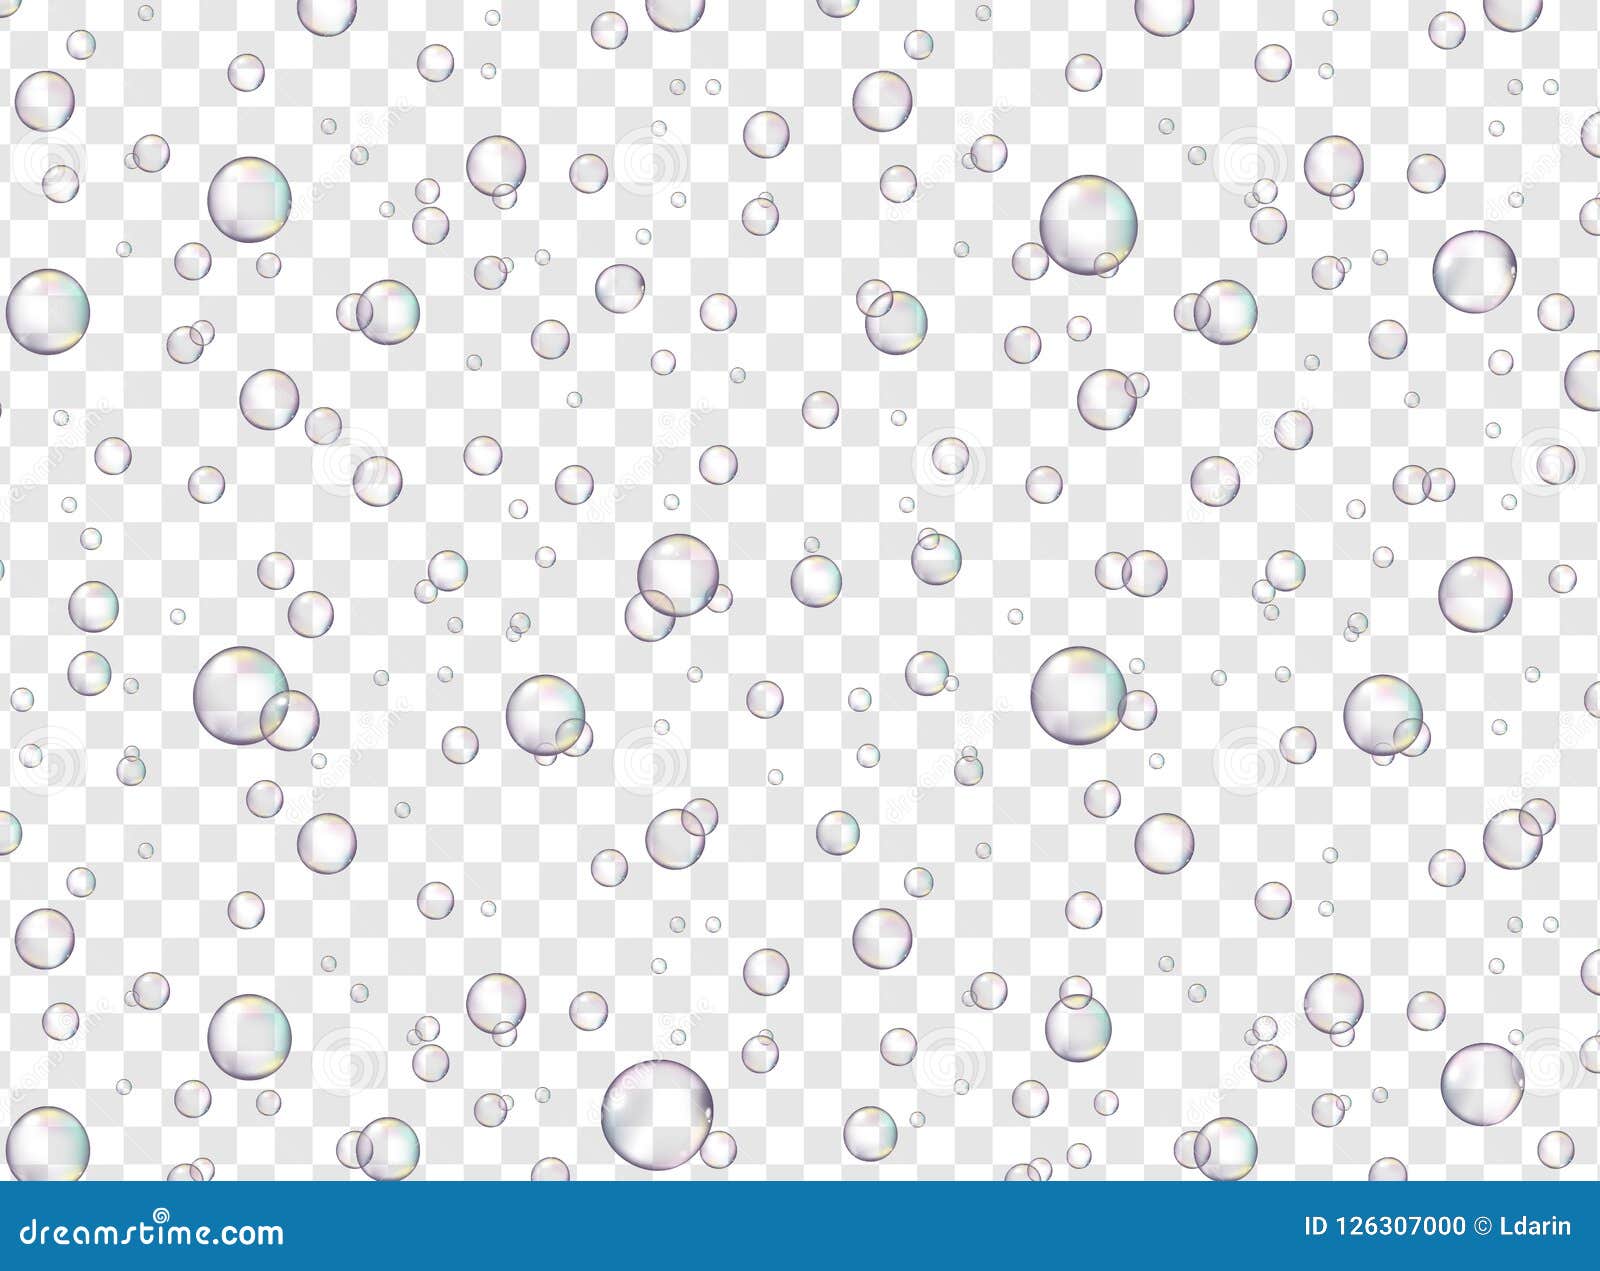 realistic bubbles on a transparent background.  seamless pattern